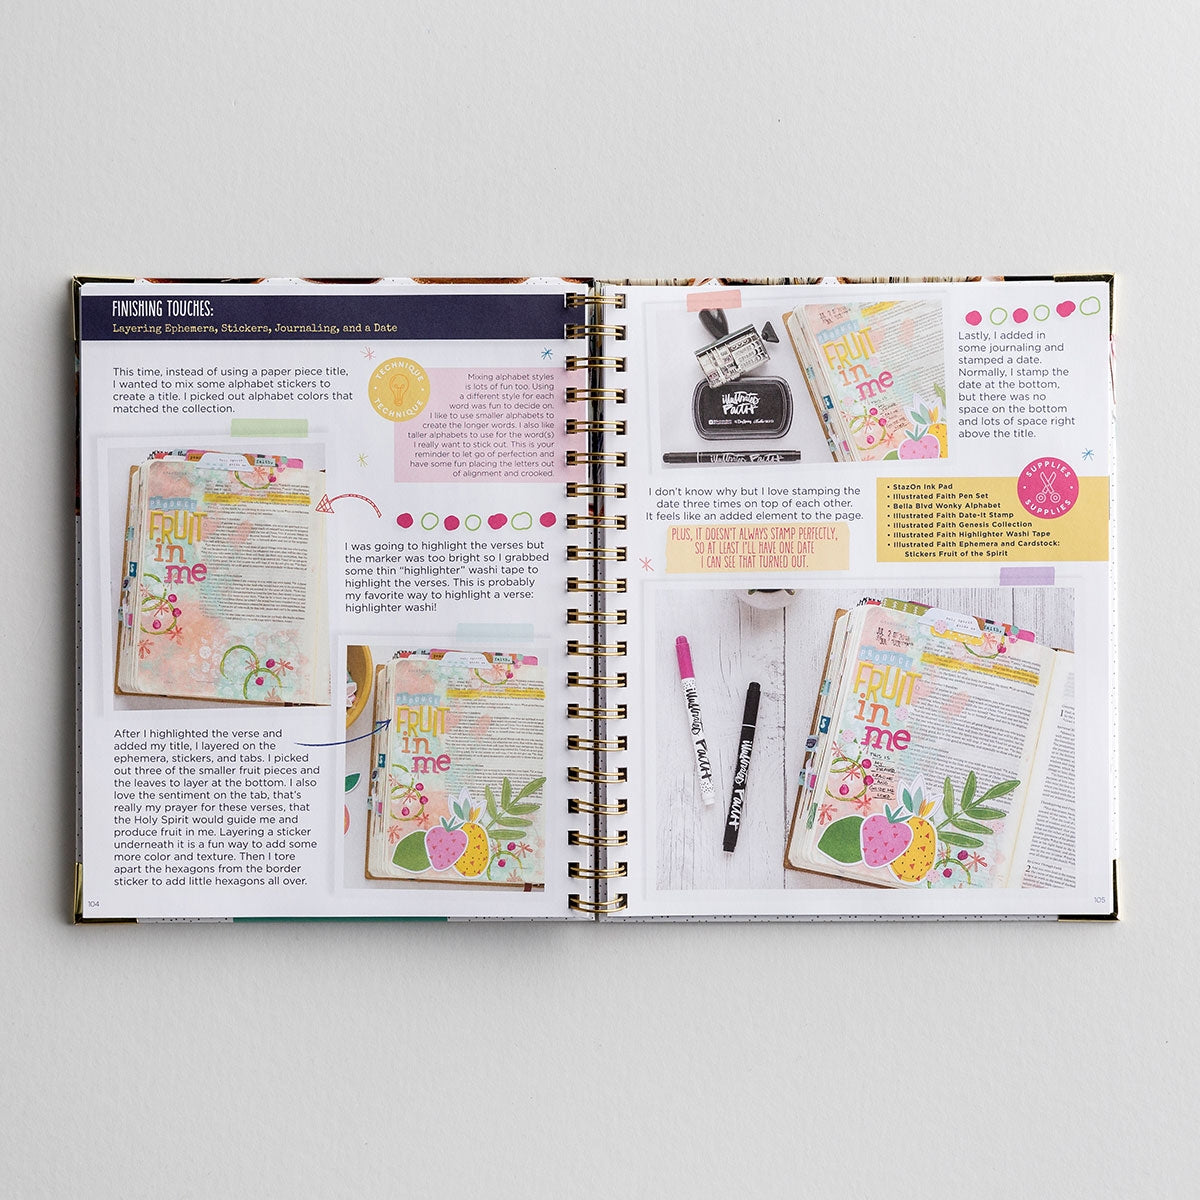 A Workbook Guide to Bible Journaling inside view.